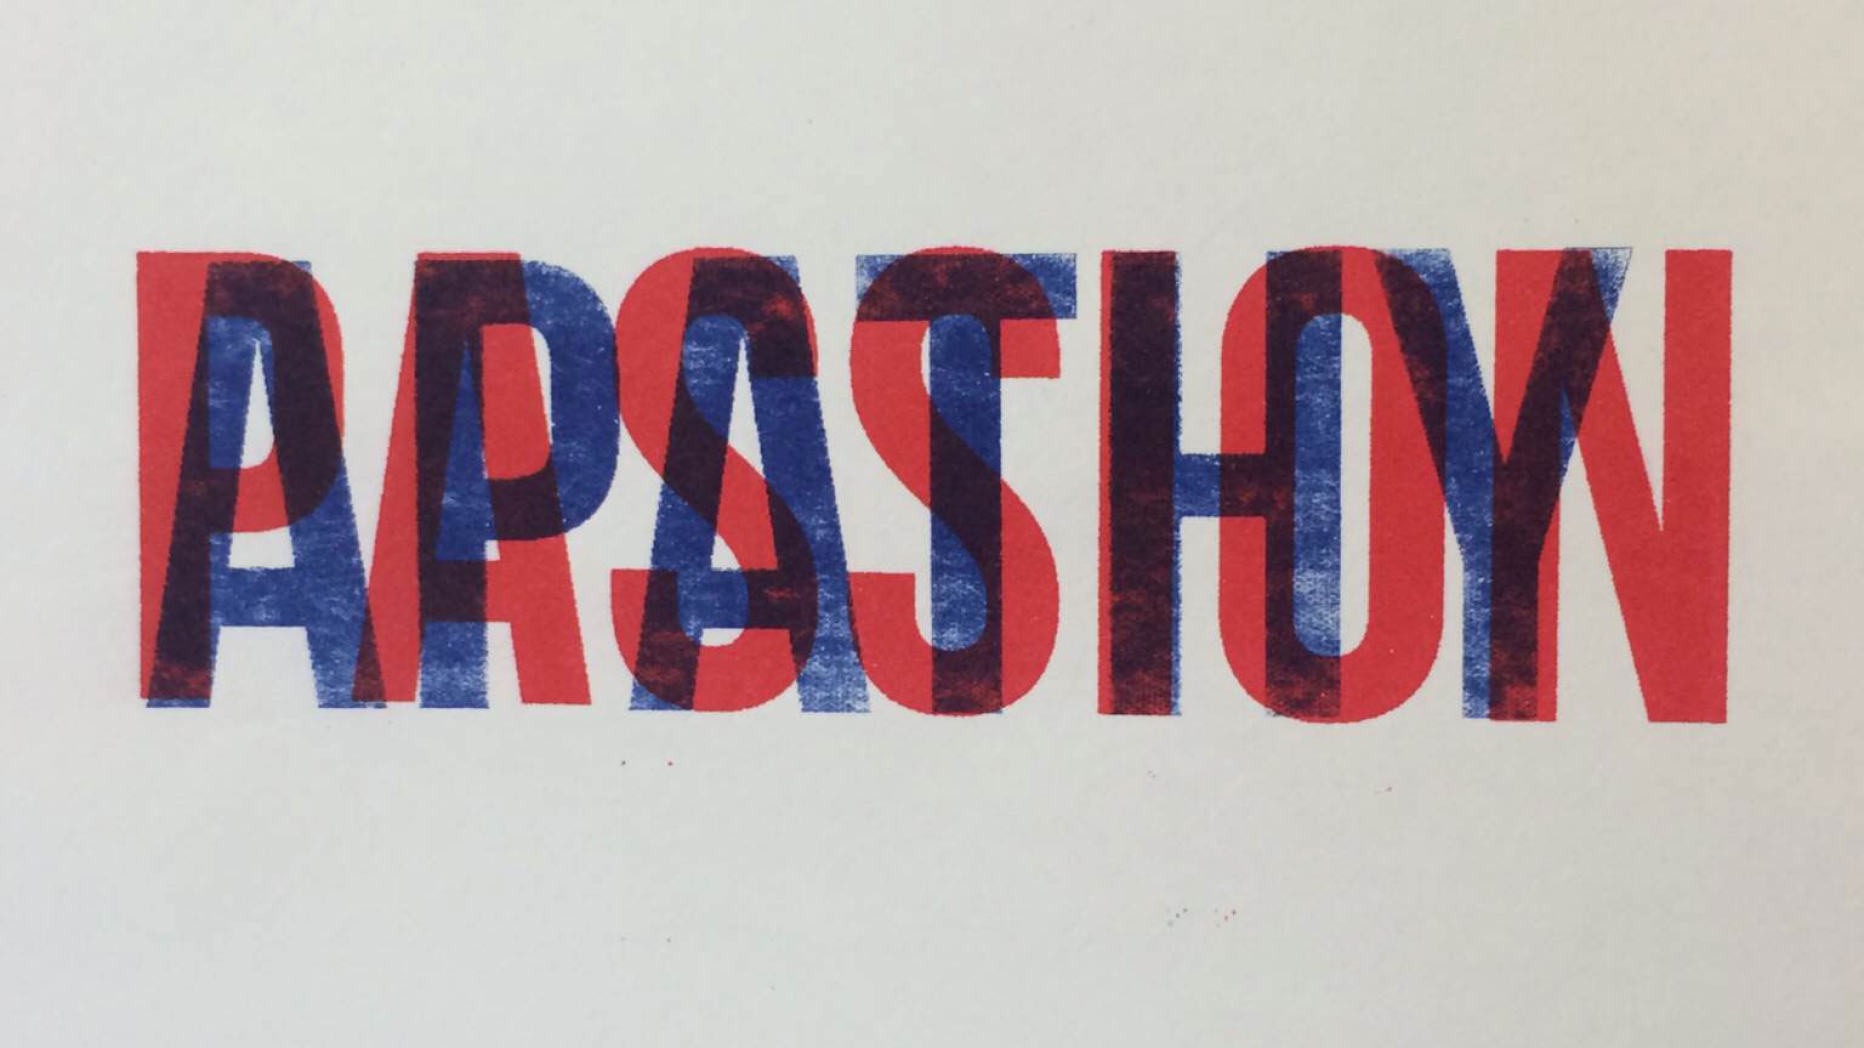 The words "Apathy" and "Passion" written on top of each other in blue and red respectively.